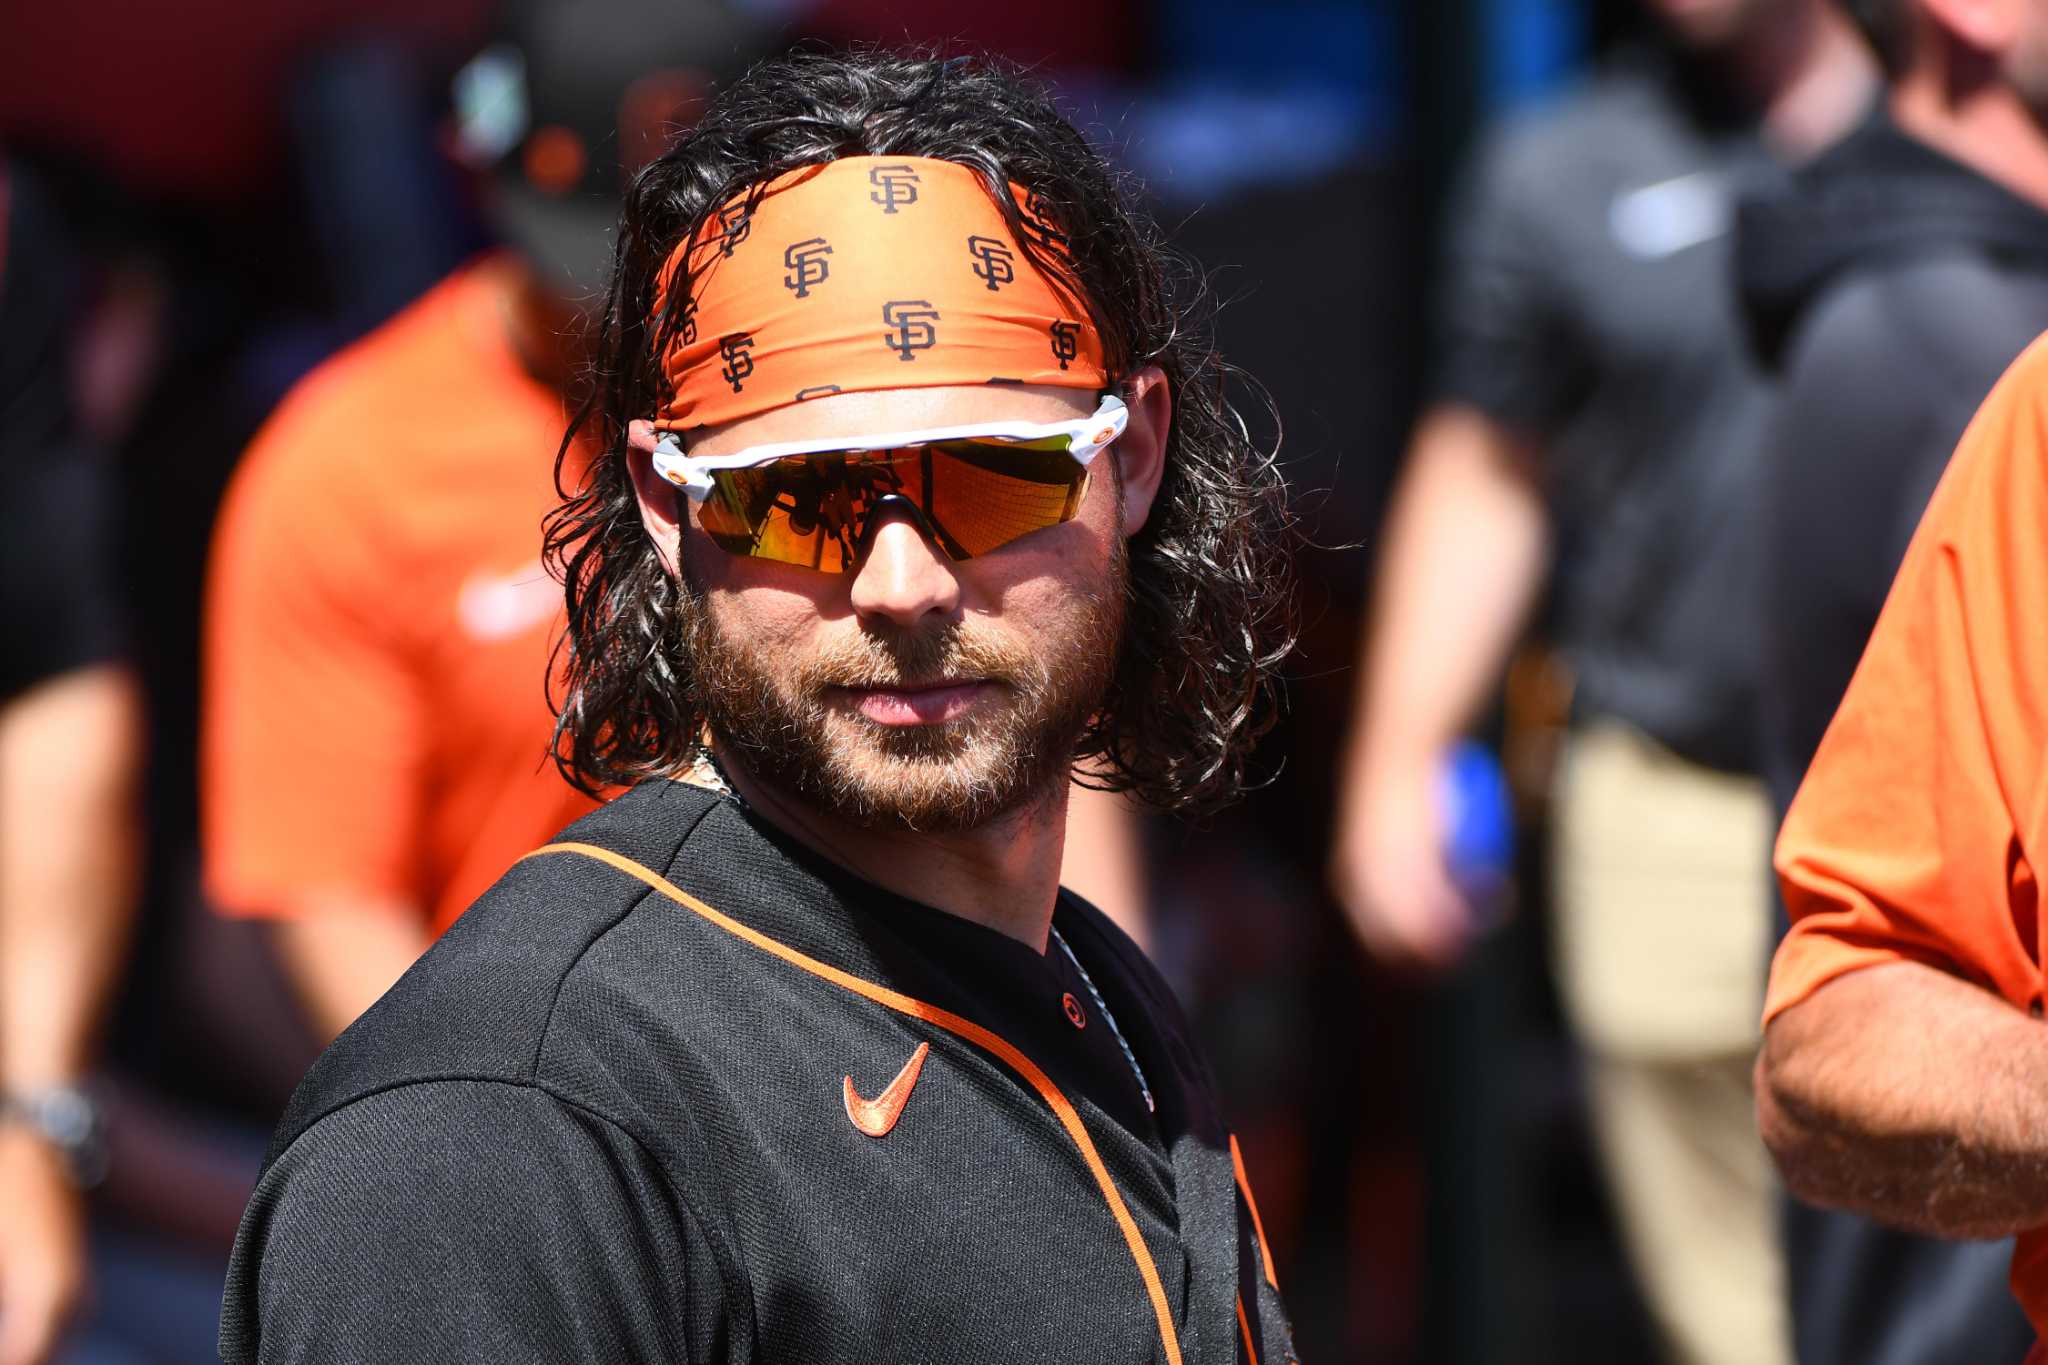 Carlos Correa or not, Brandon Crawford is ready to lead SF Giants